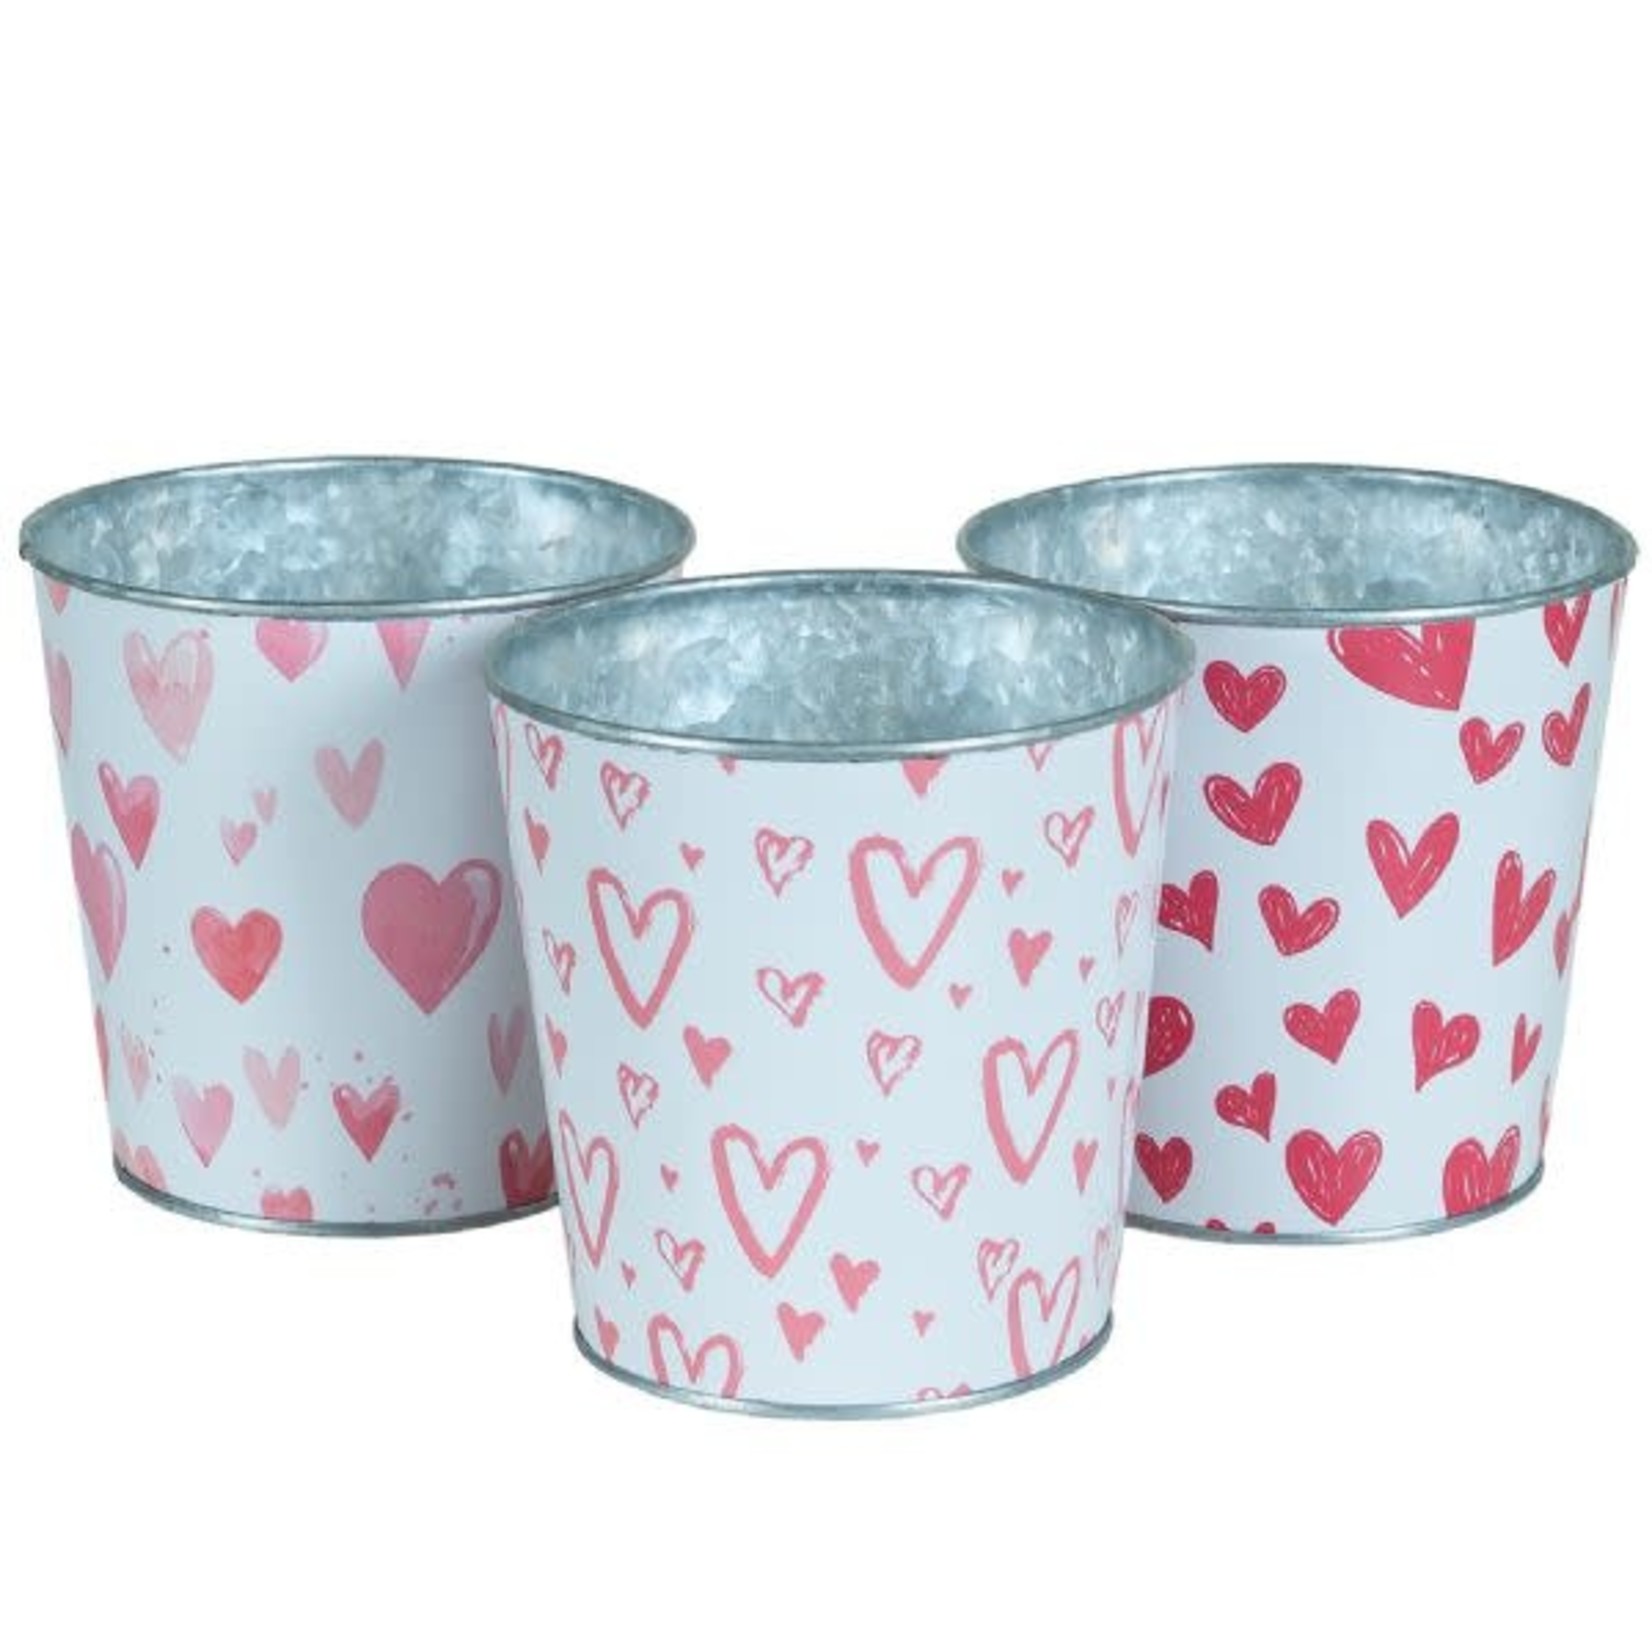 4.75" ROUND MULTI HEARTS METAL CONTAINER, REG $5.99 NO DISCOUNT